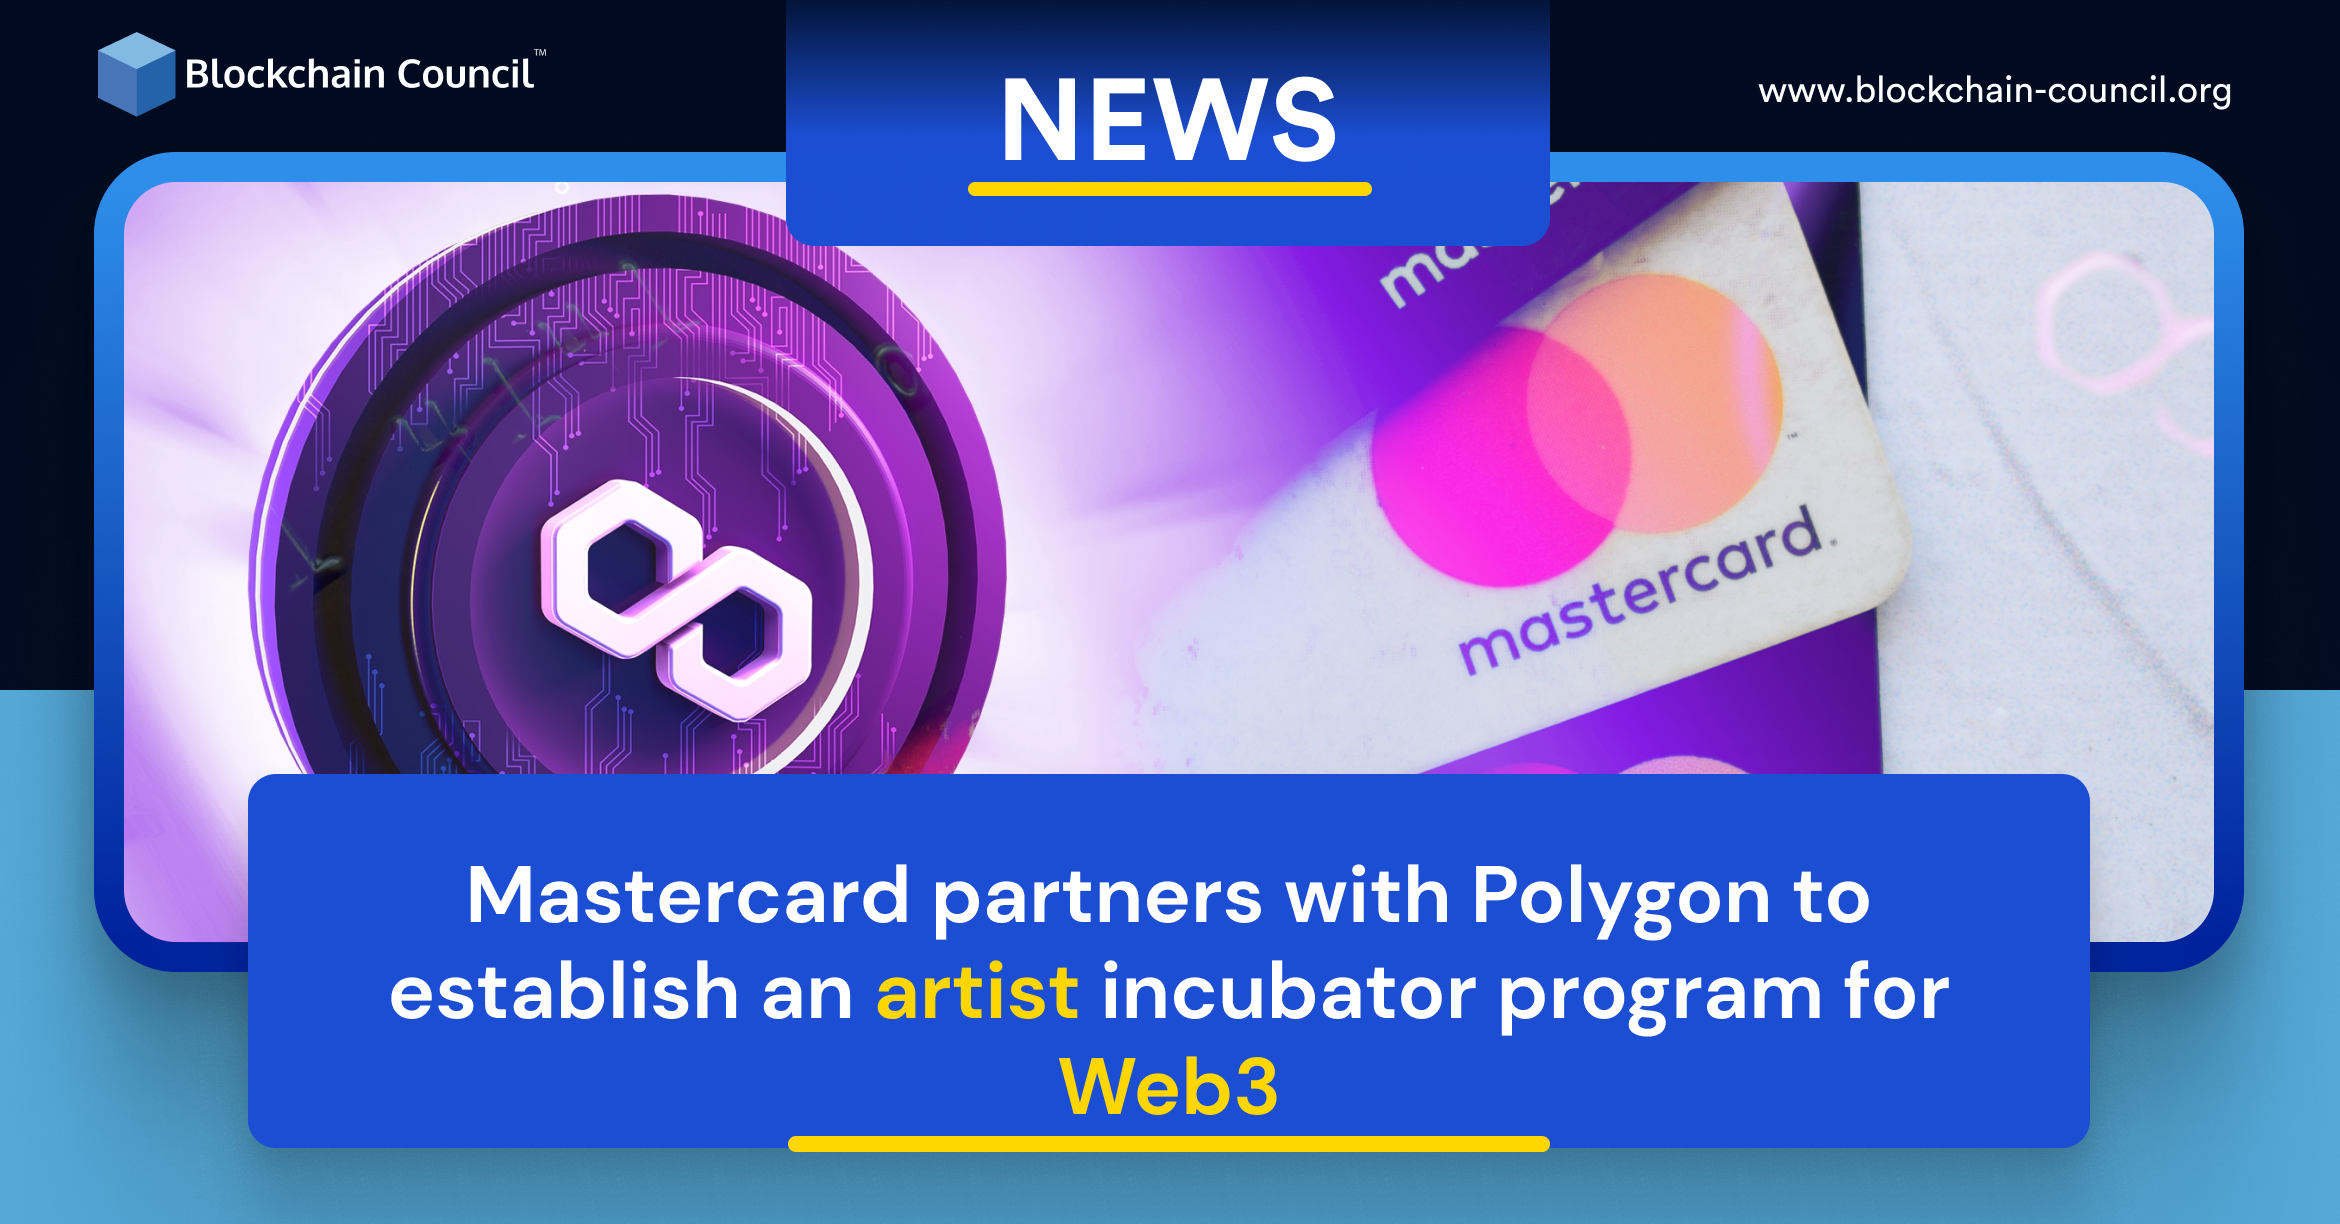 Mastercard partners with Polygon to establish an artist incubator program with a Web3 focus